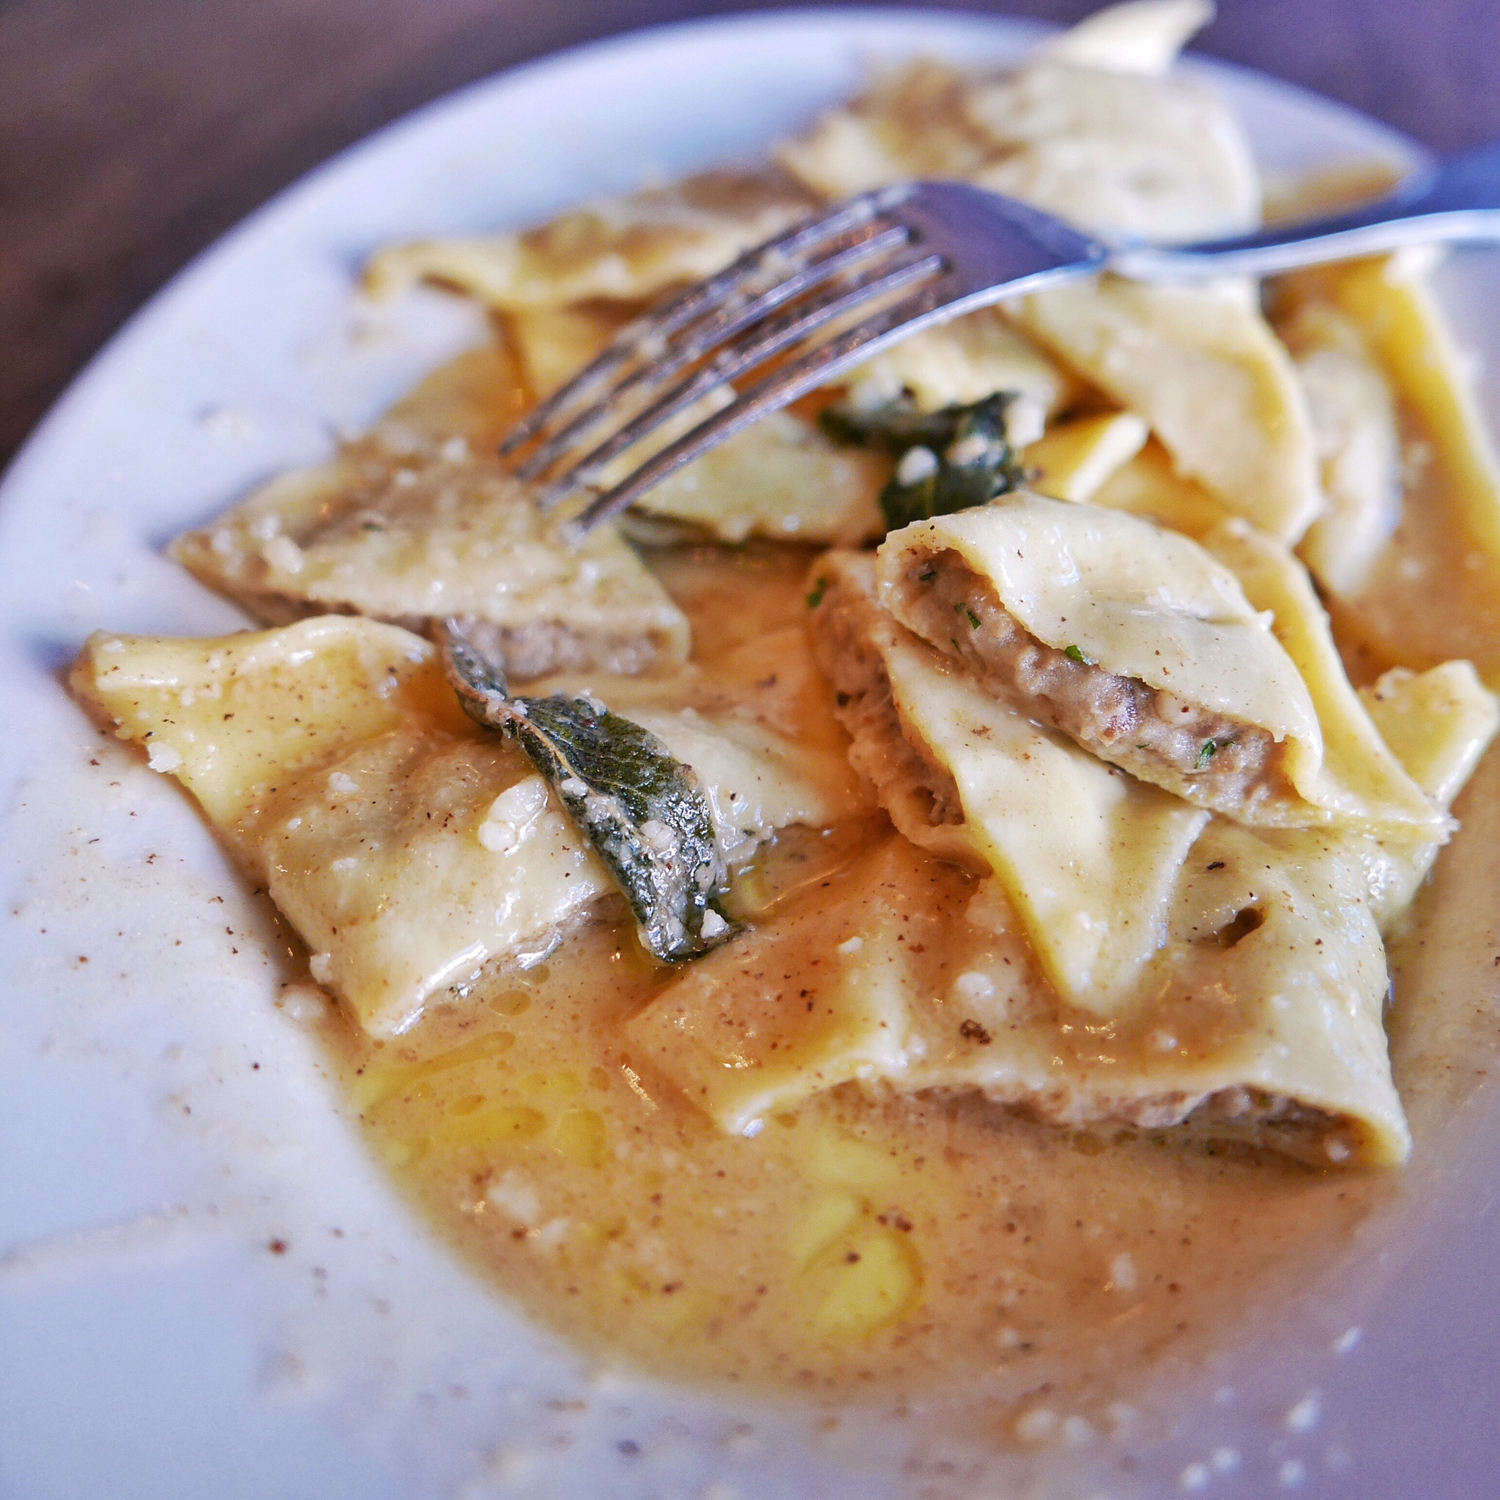 Potato and Porcini Ravioli in Brown Butter and Sage Sauce